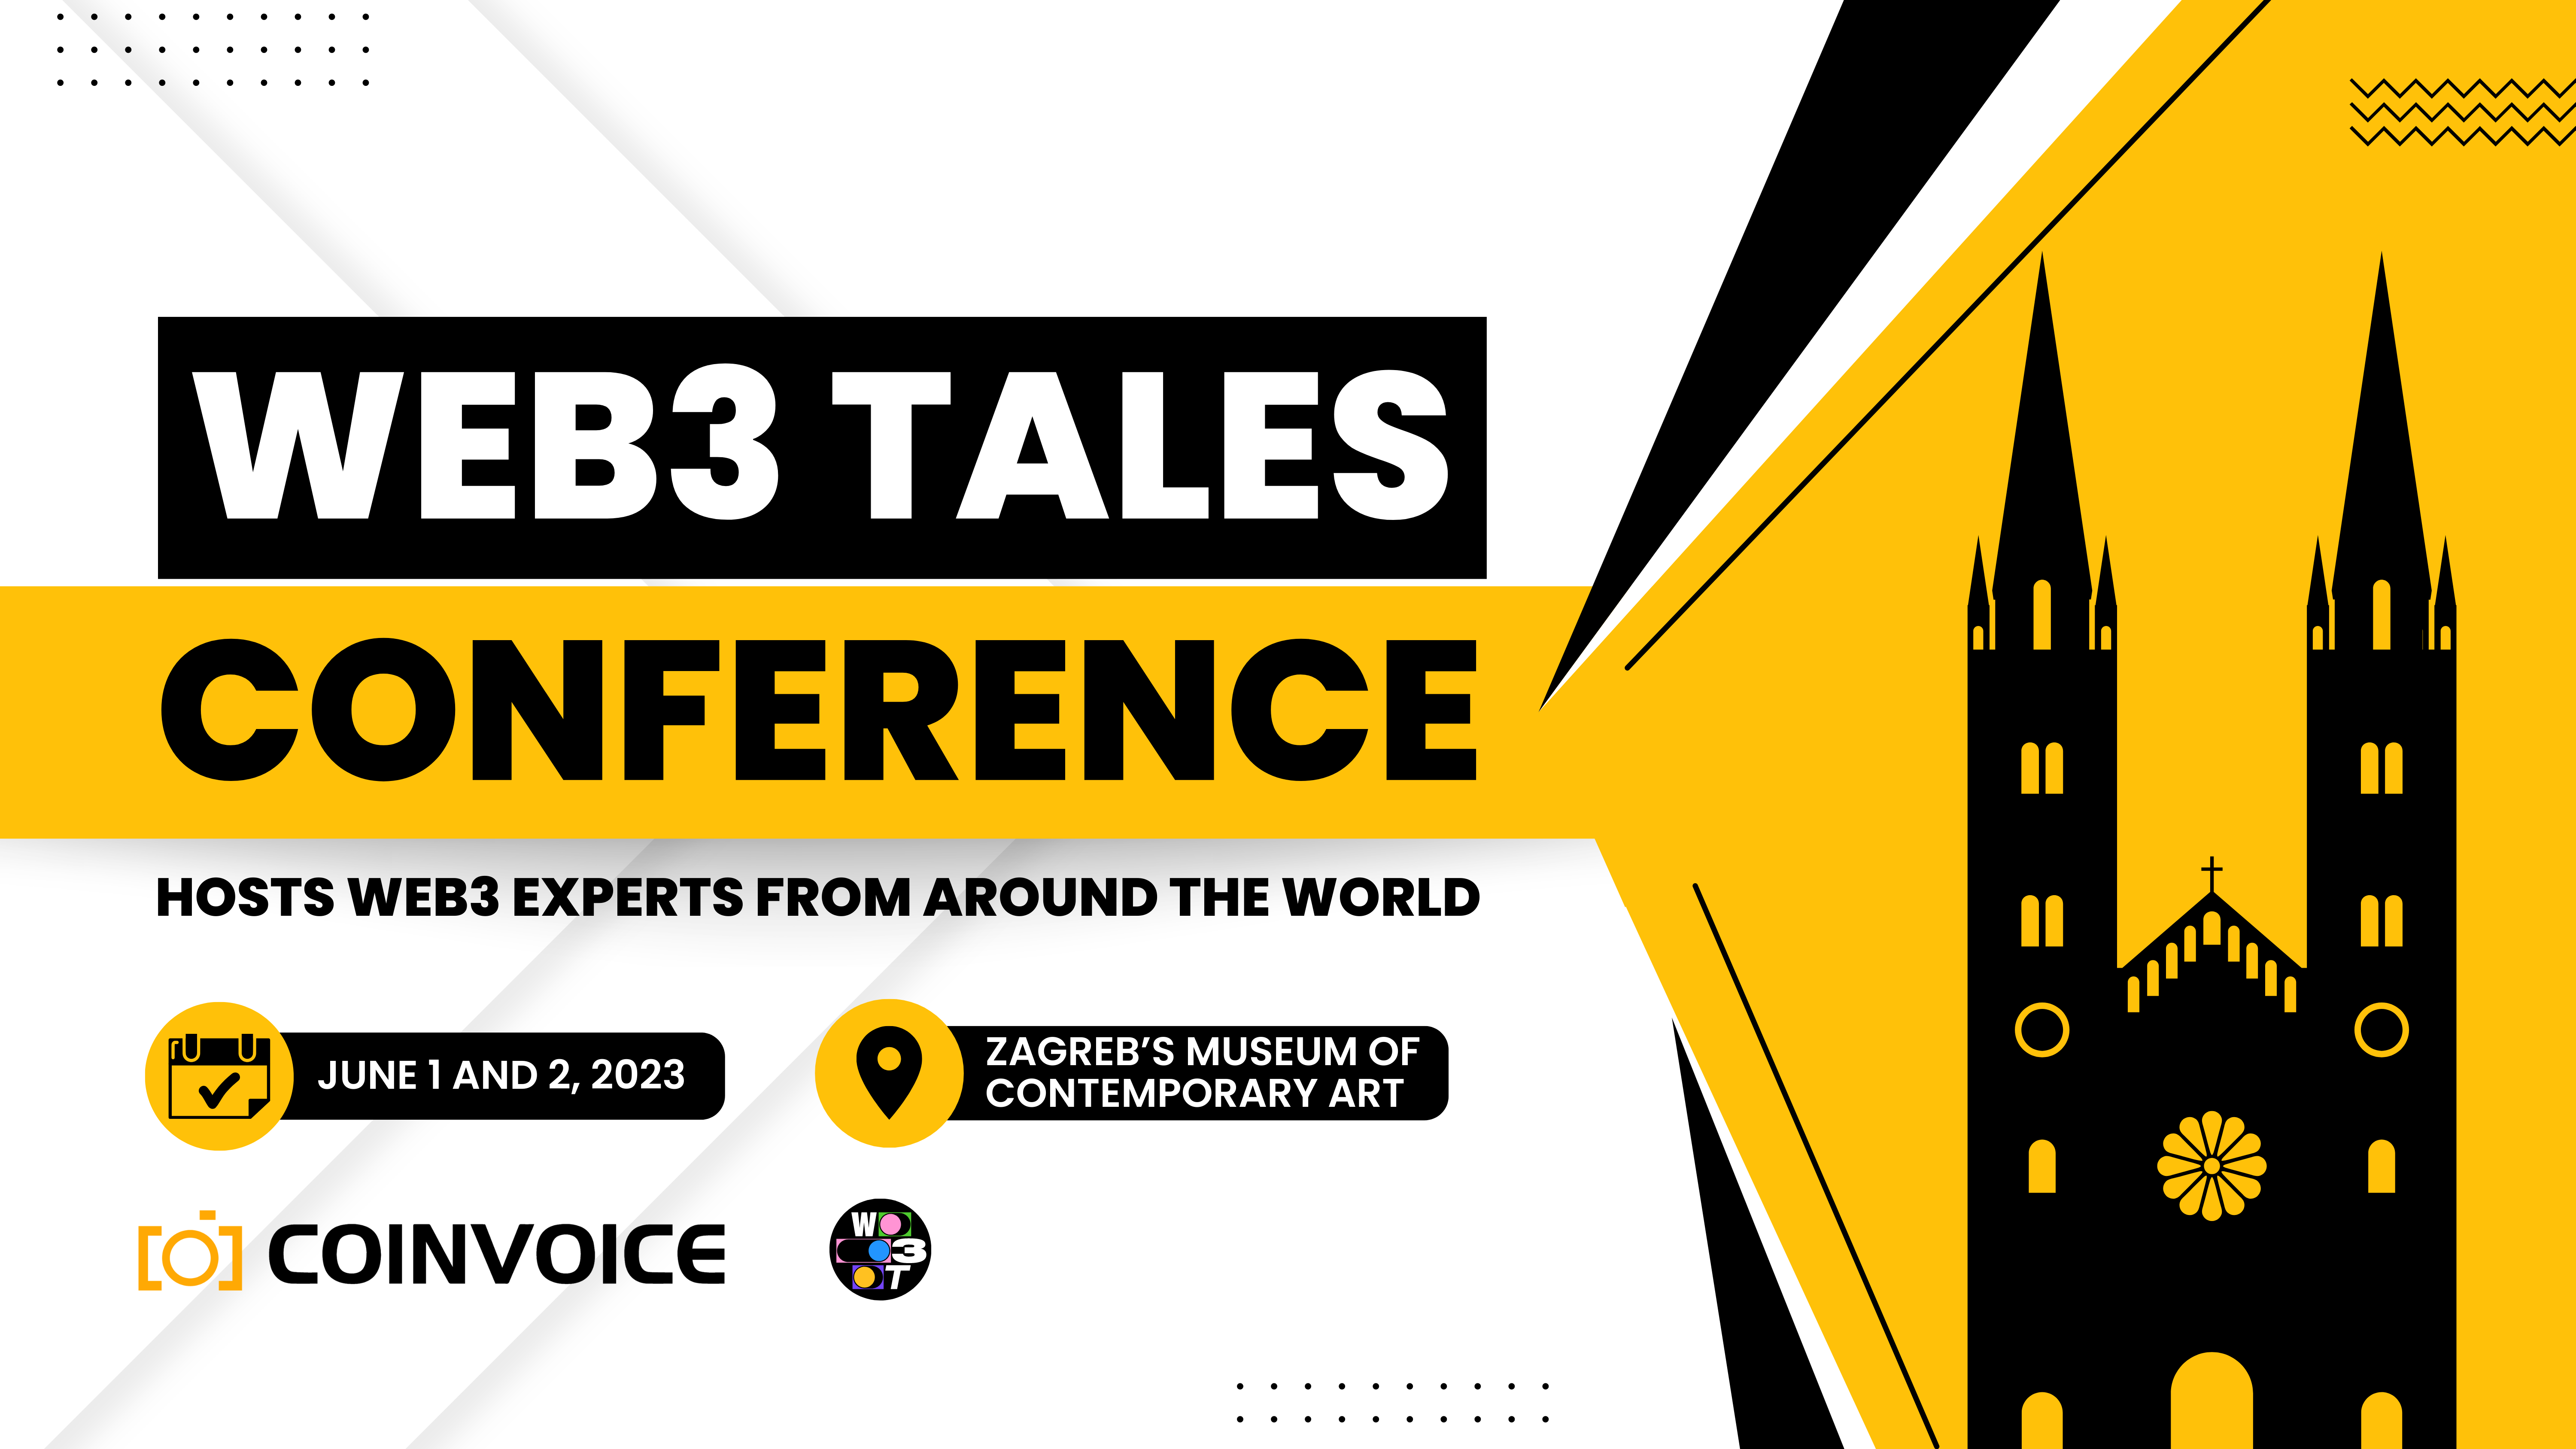 WEB3 TALES conference will host Web3 experts from around the world